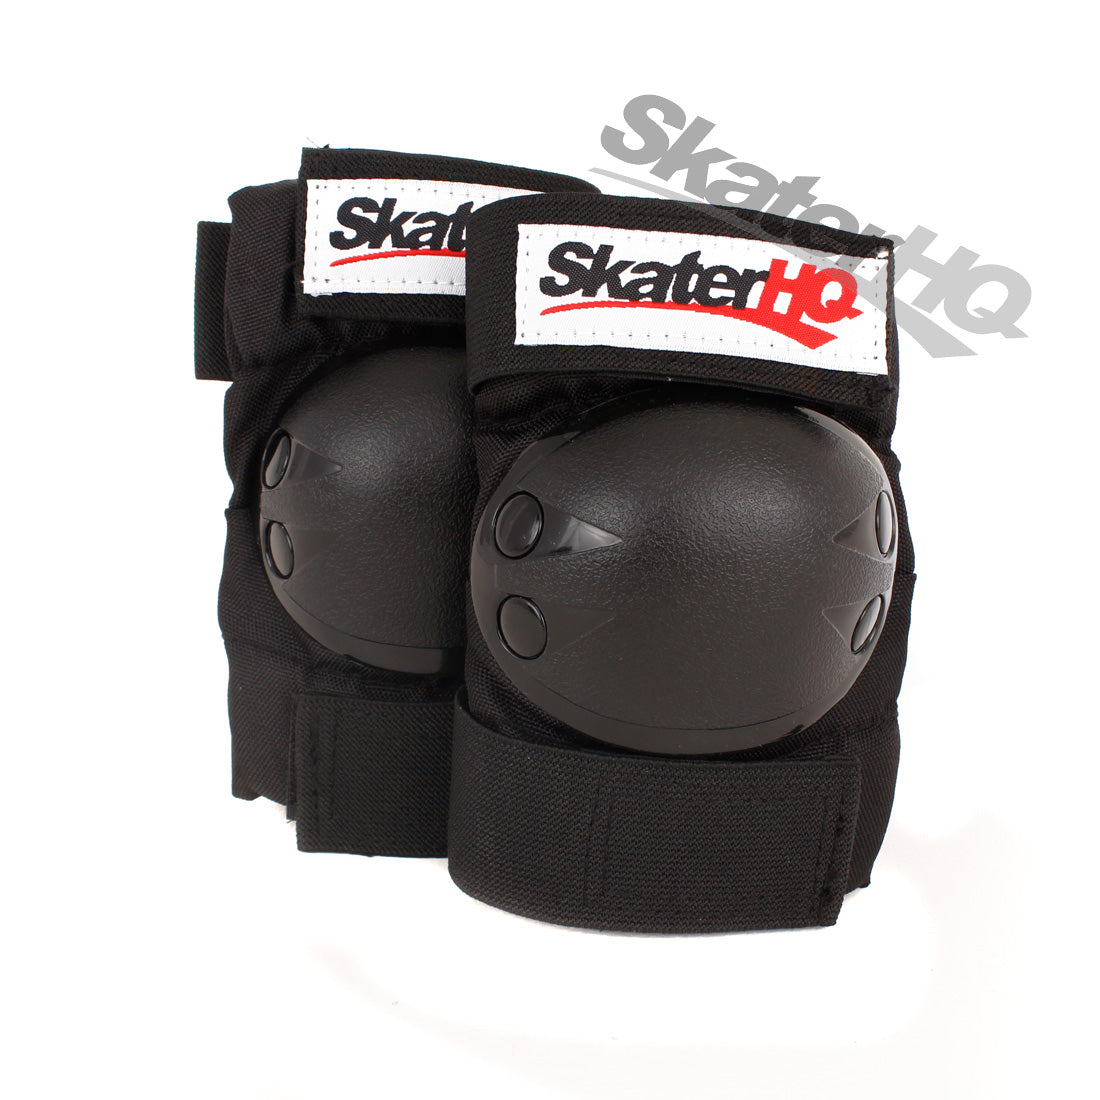 Skater HQ Elbow Pads - Junior Protective Gear